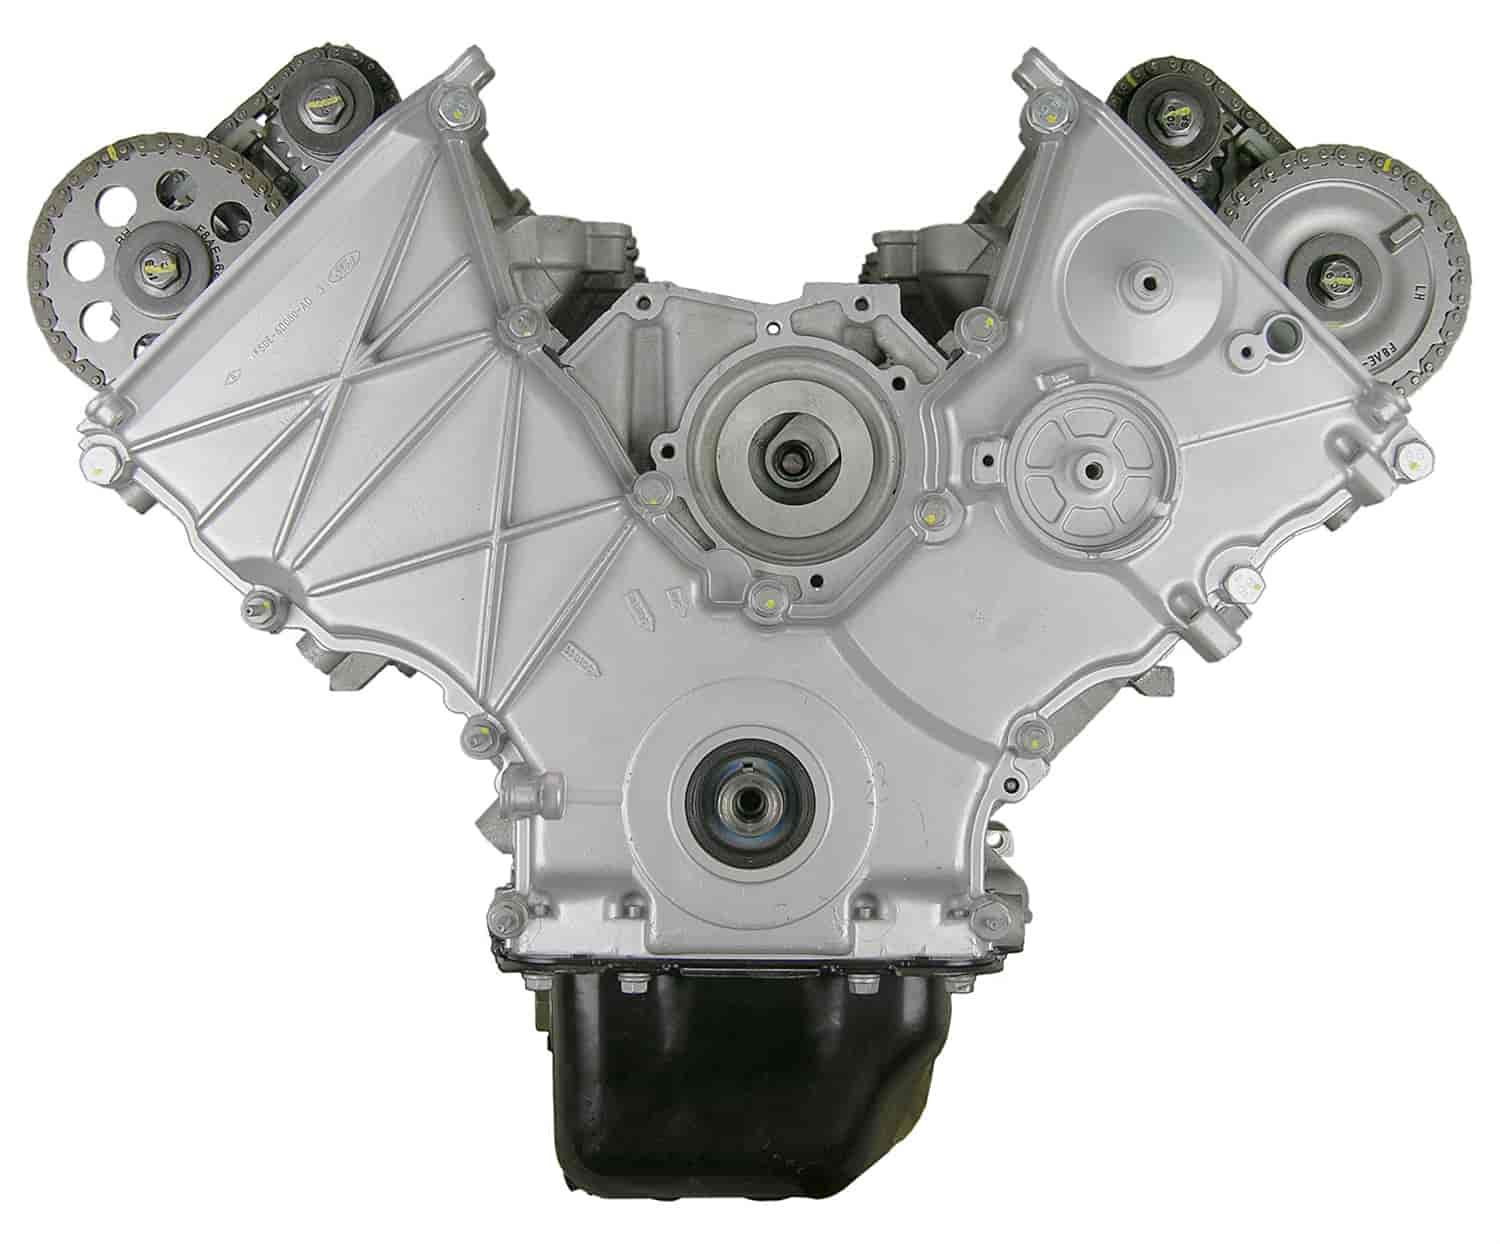 Remanufactured Crate Engine for 1997-1998 Lincoln Continental